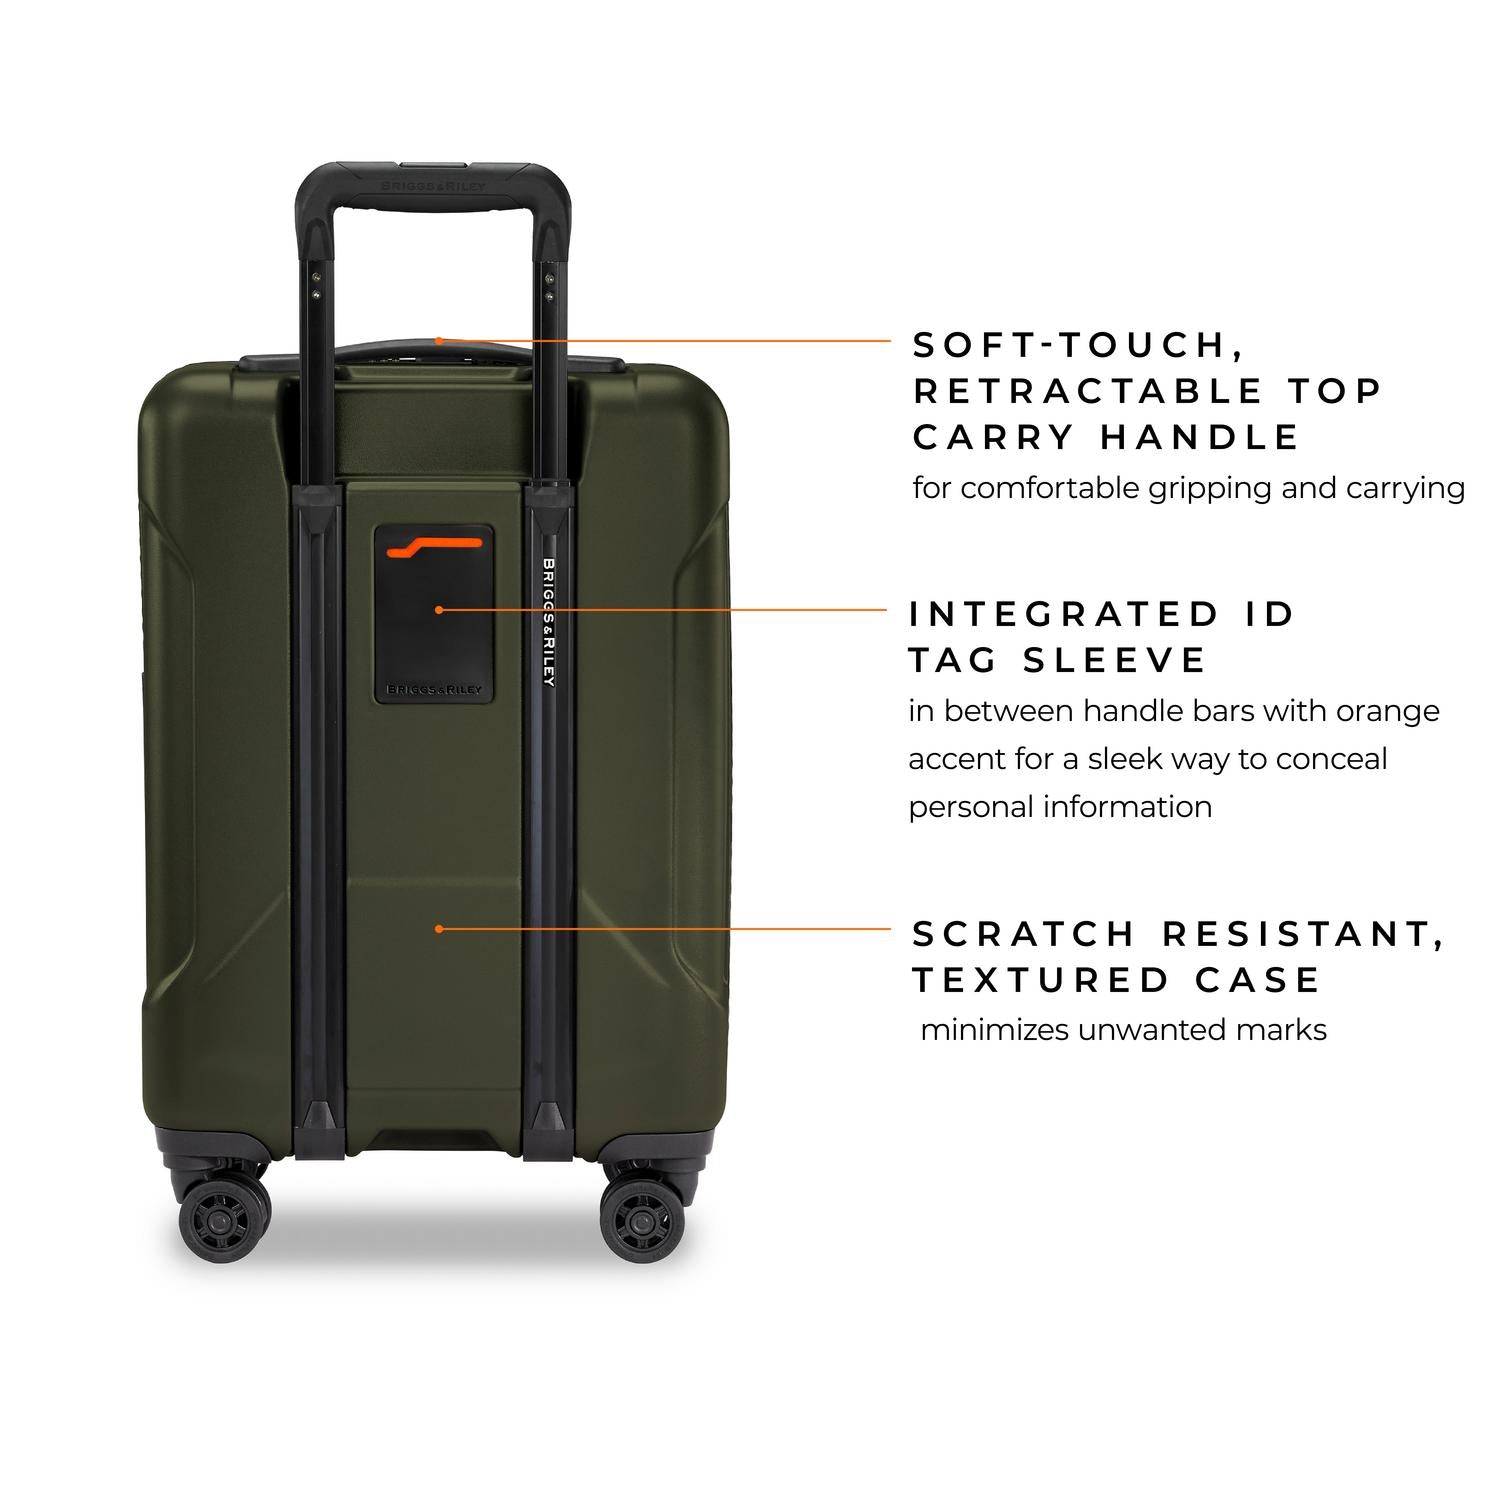 briggs & riley torq green international 21" carry-on spinner soft-touch retractable top carry handle for comfortable gripping and carrying, integrated id tag sleeve in between handle bars with orange accent for a sleek way to conceal personal information, scratch resistant textured case minimizes unwanted marks #color_hunter